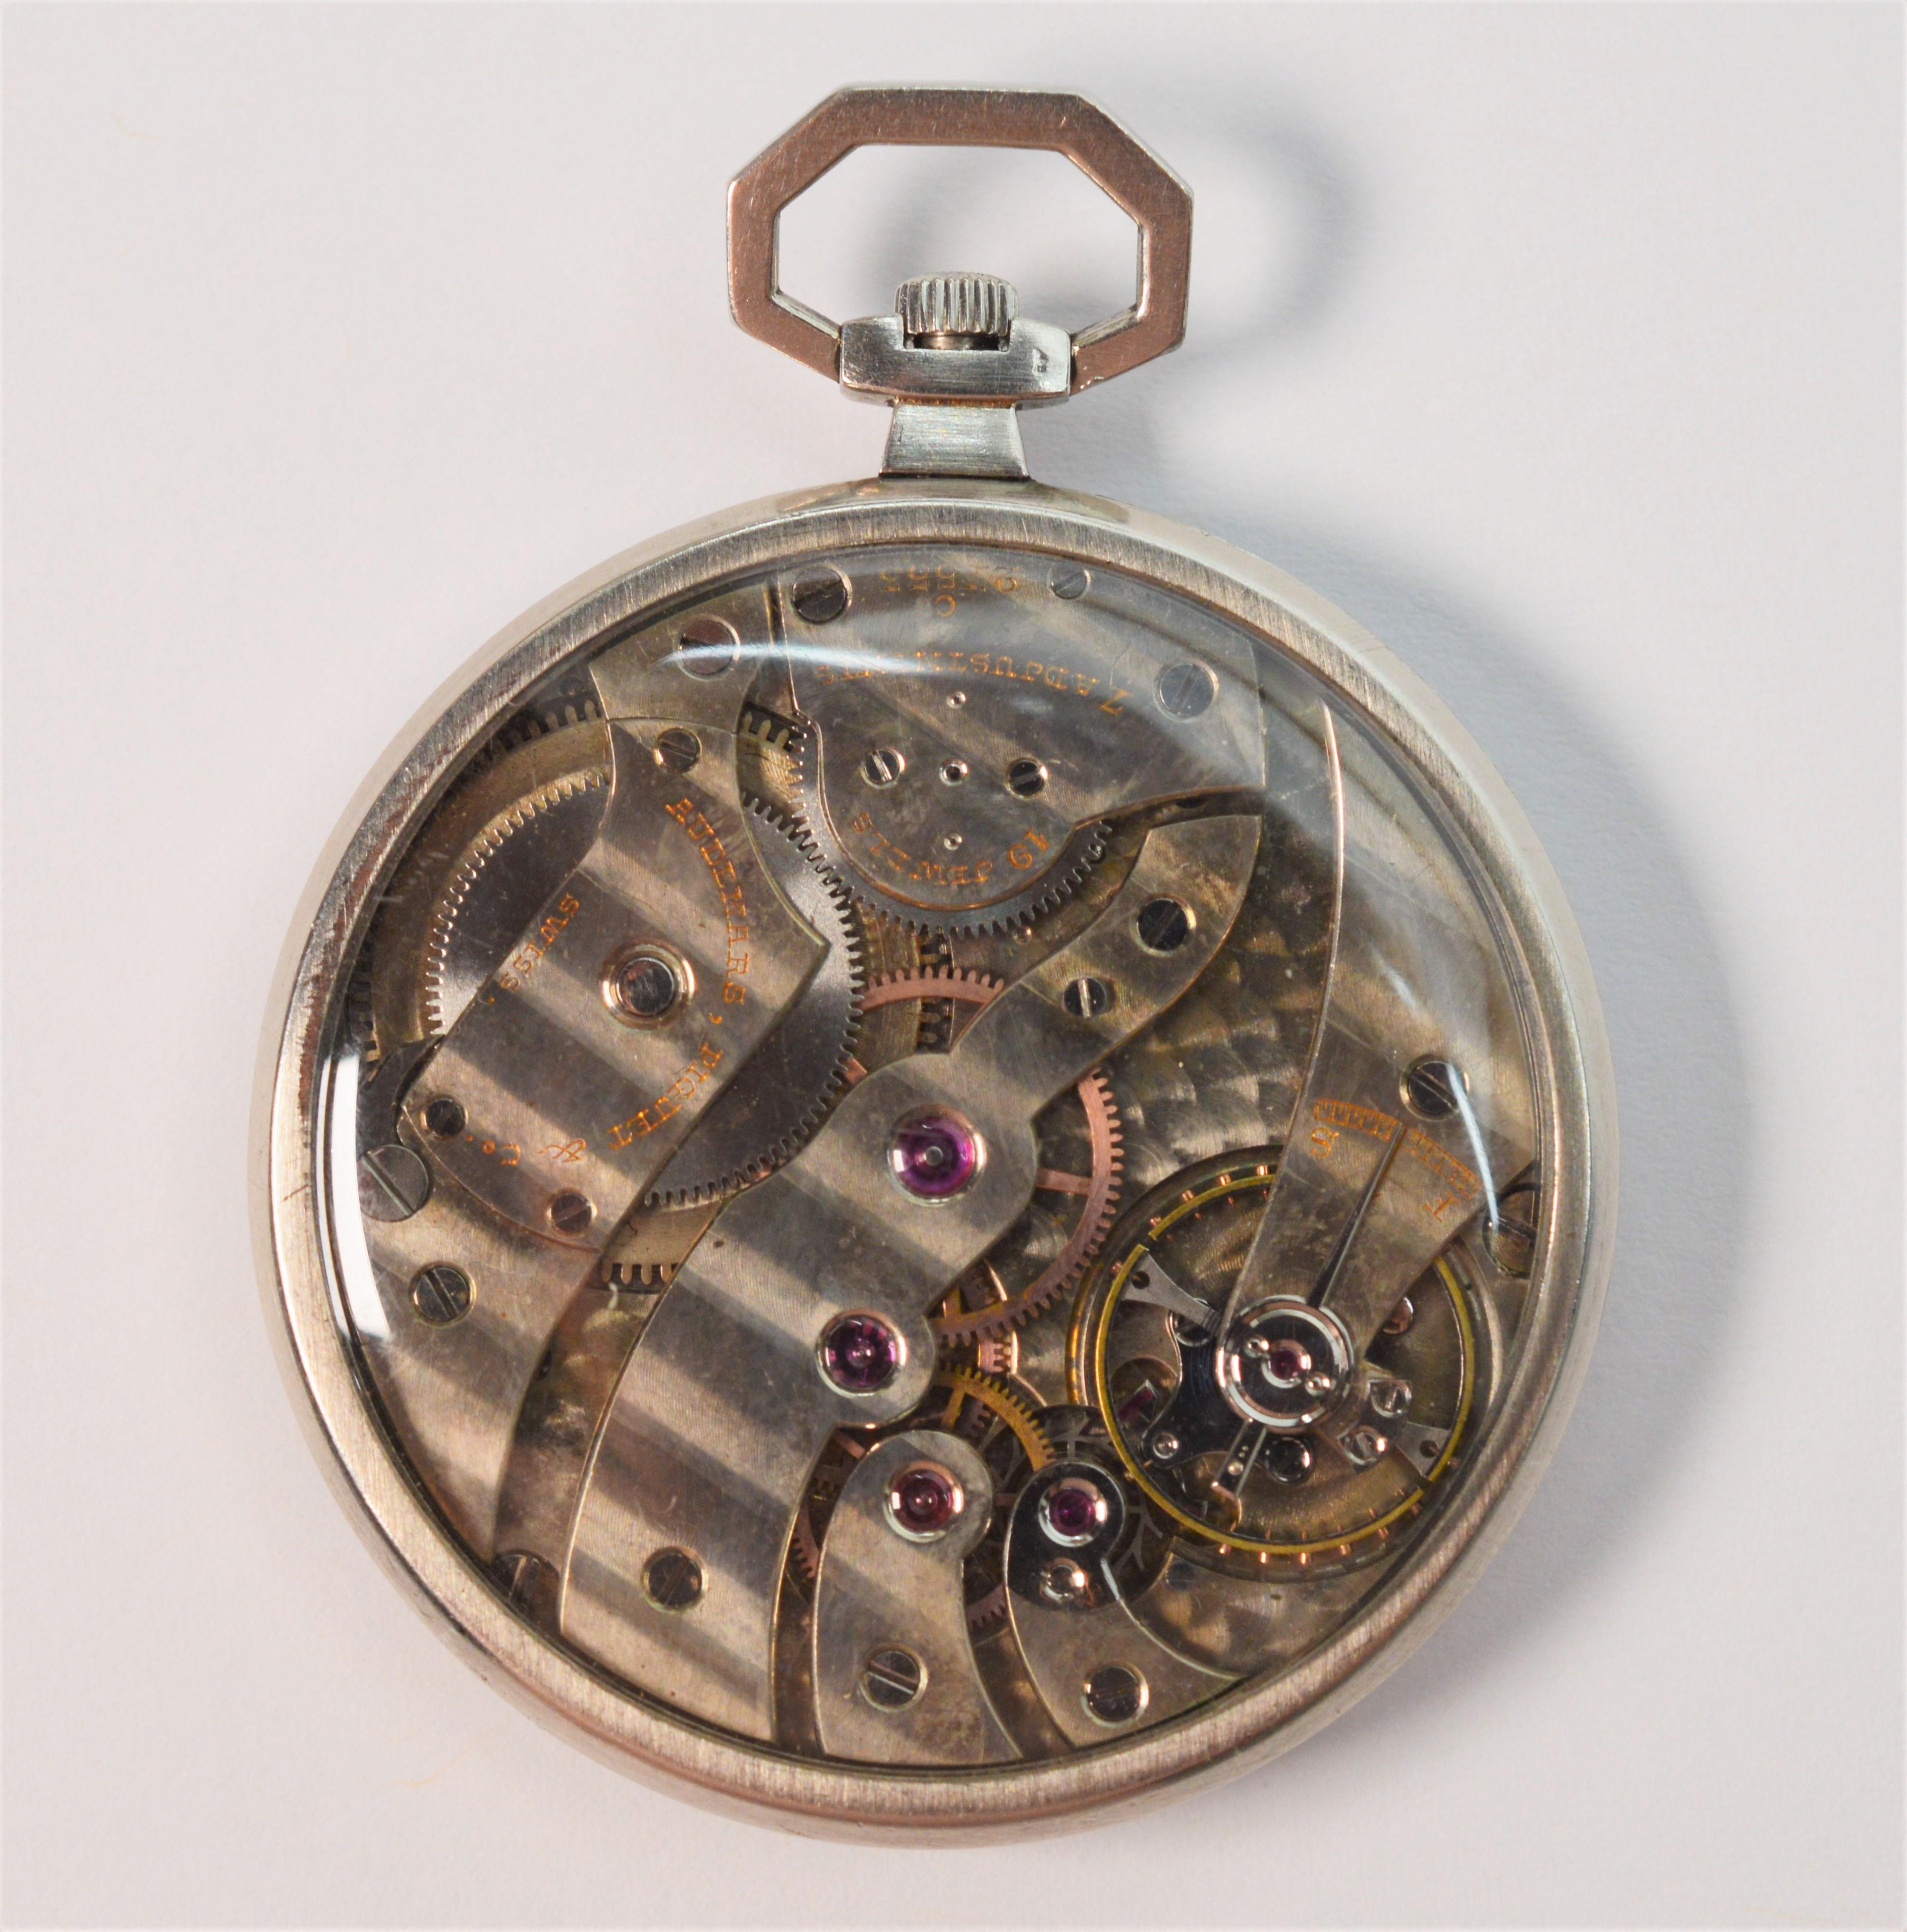 Sleek, late twentieth century platinum pocket watch by Audemars Piquet Swiss for Tiffany & Co. with special order glass display back to view its intricate nineteen jewels seven adjustment movement in motion. In watch size is 41mm (approximately 1